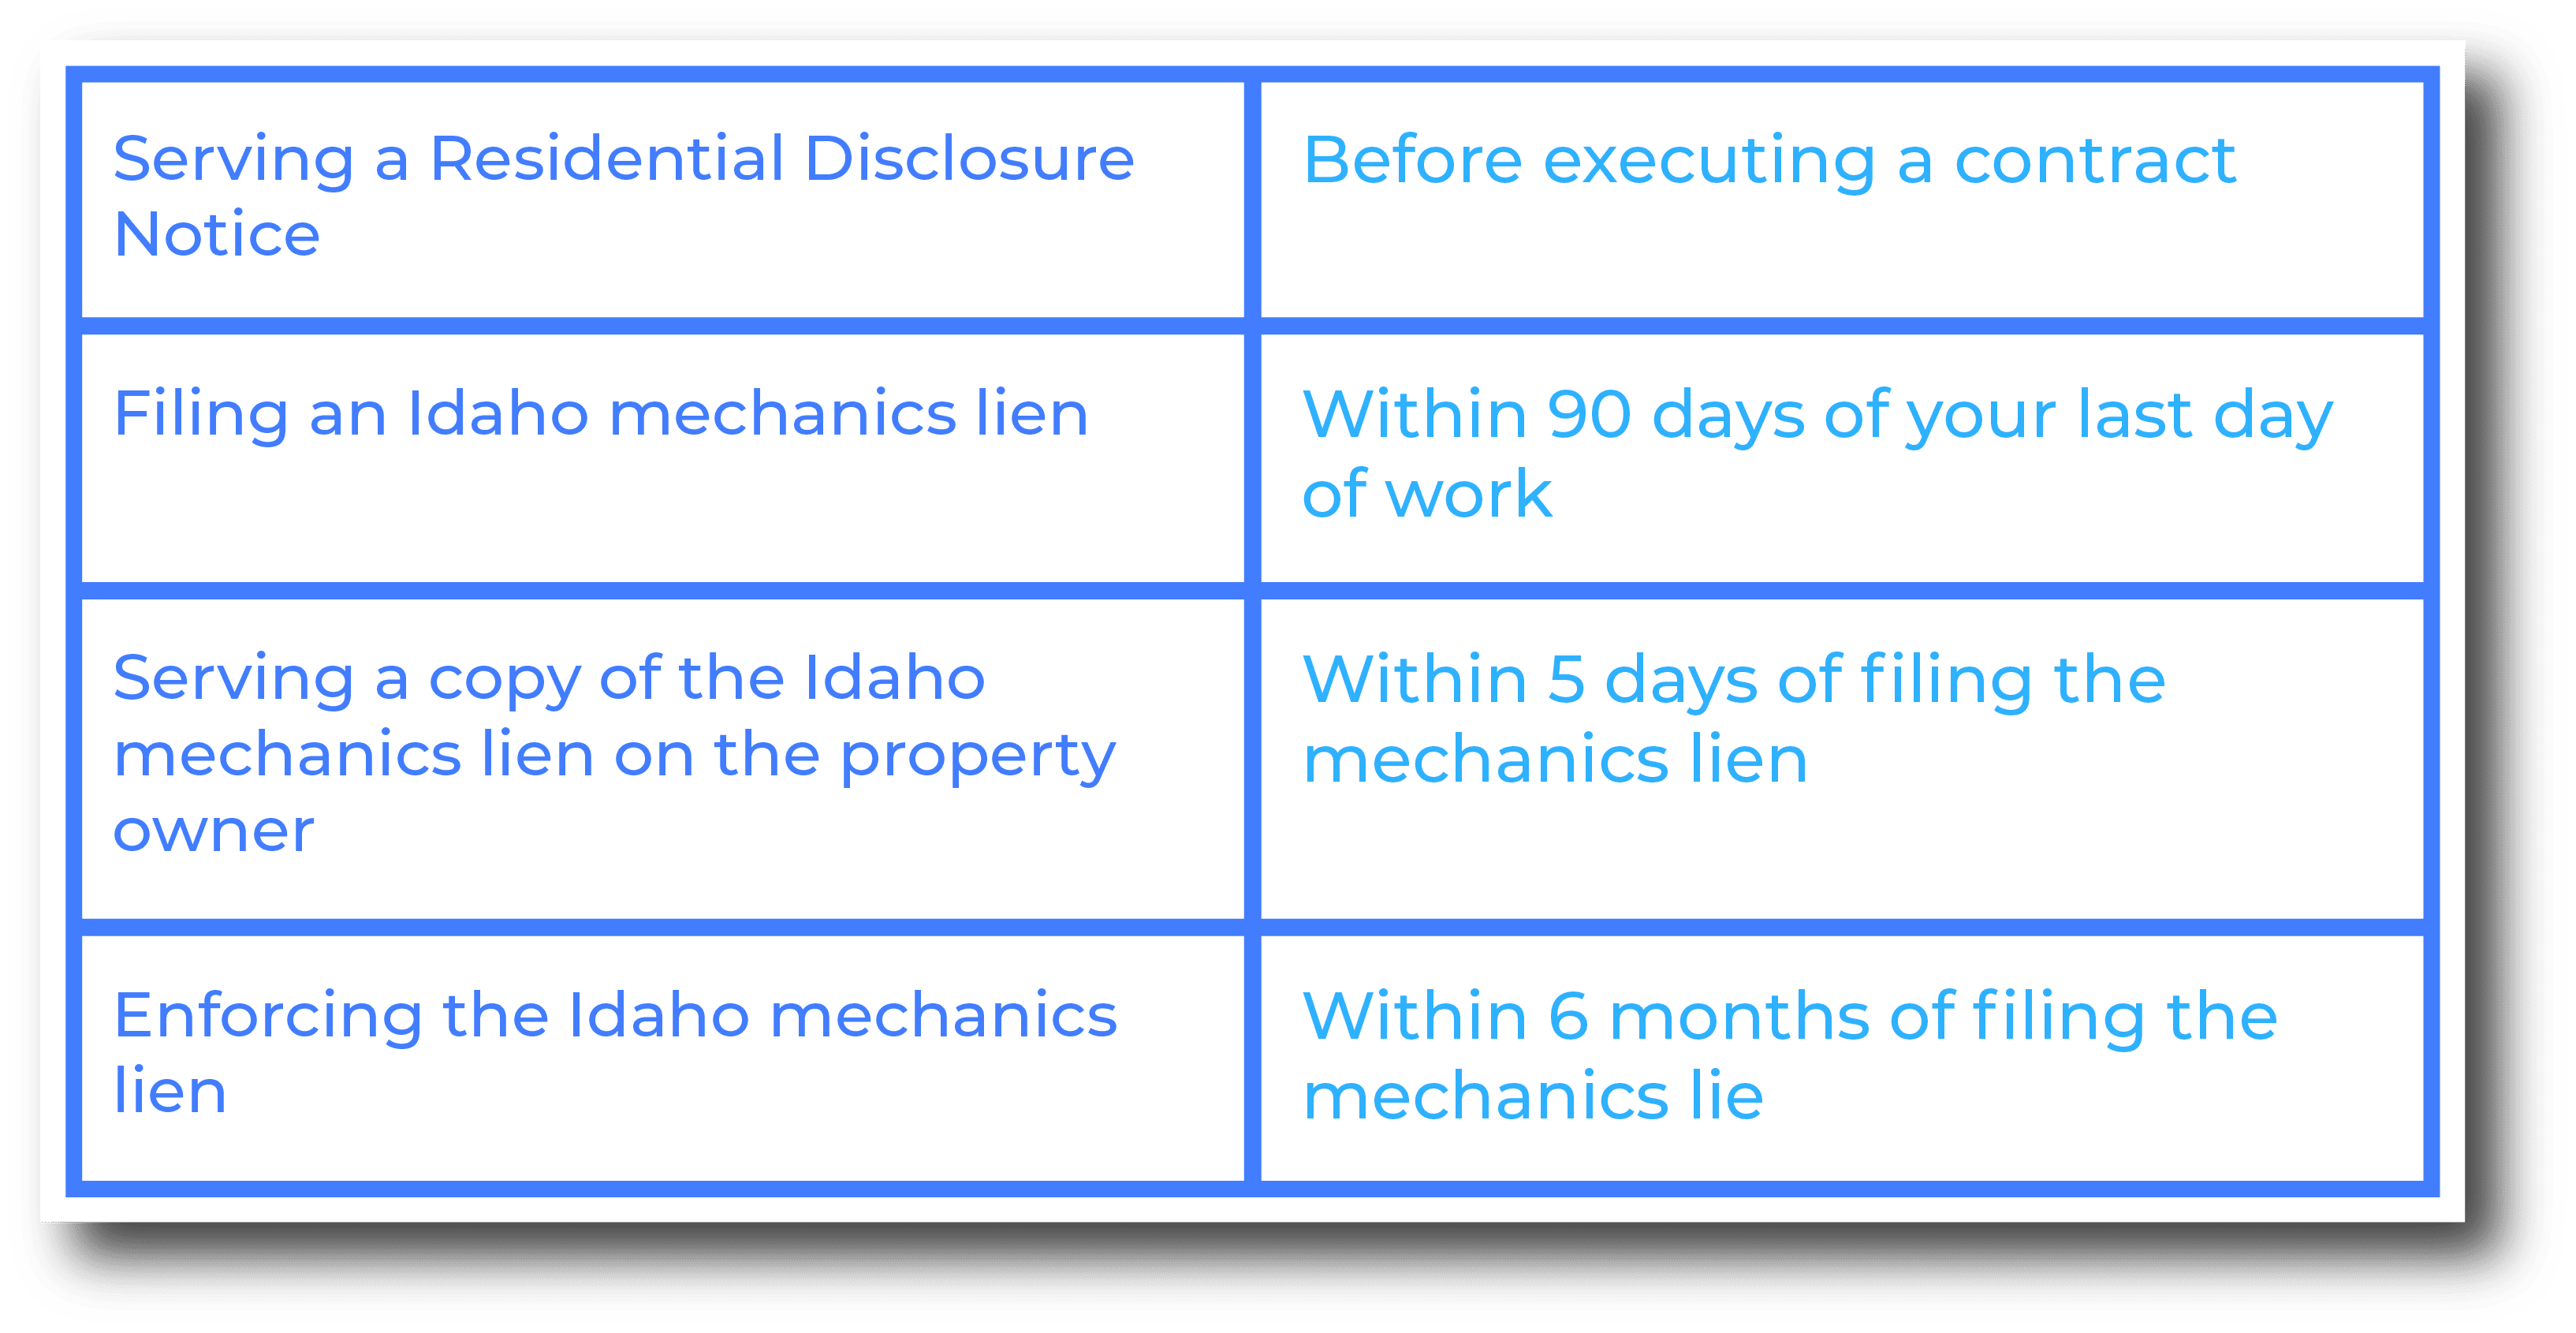 Important deadlines to remember when filing a mechanics lien in Idaho